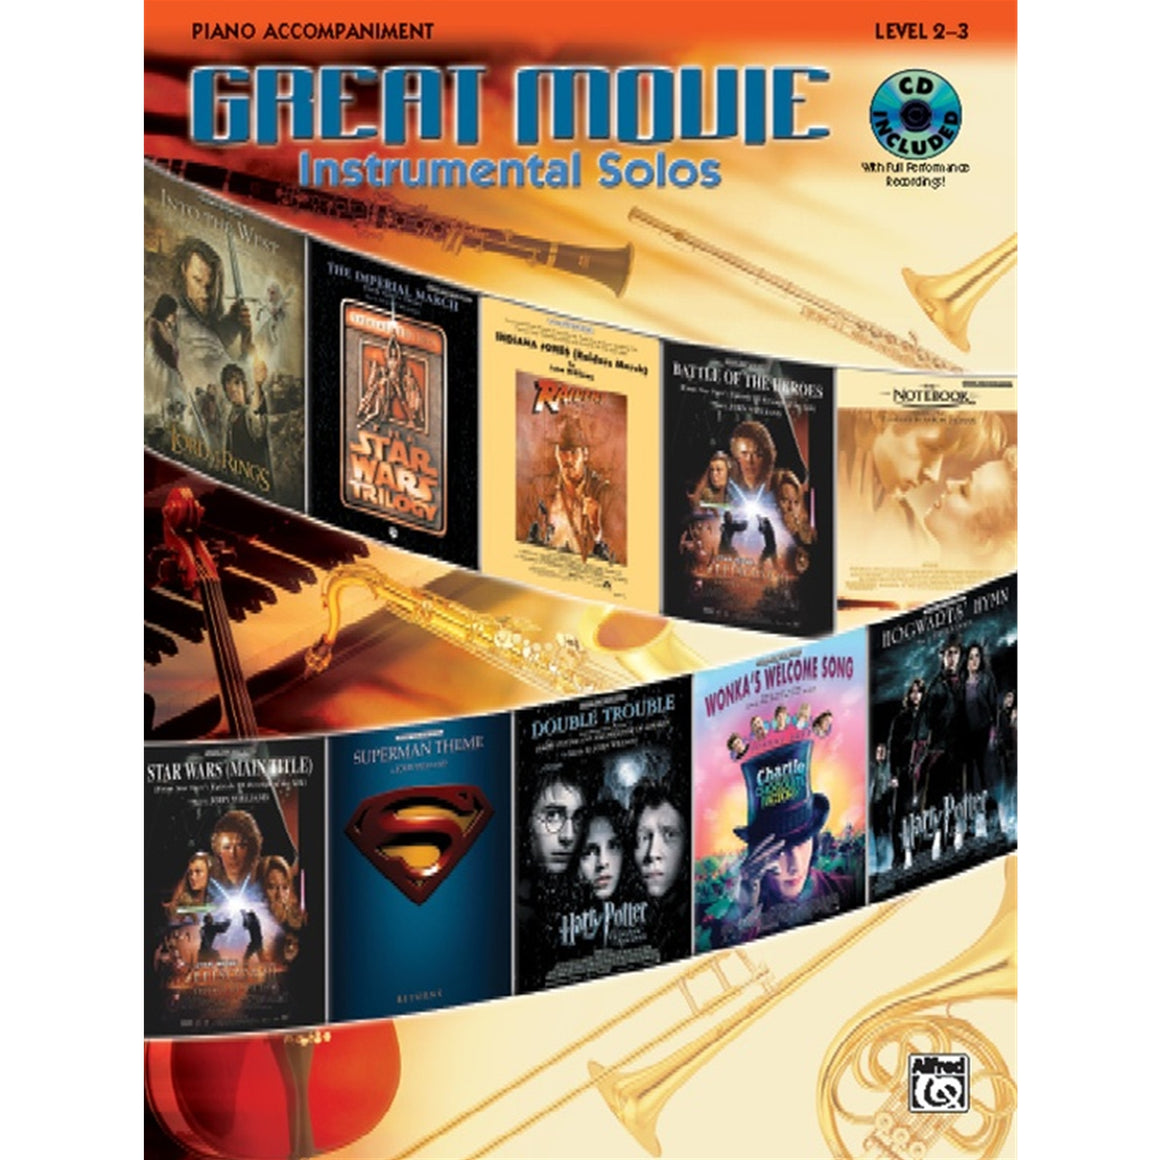 ALFRED 26243 Great Movie Instrumental Solos [Piano Acc.]